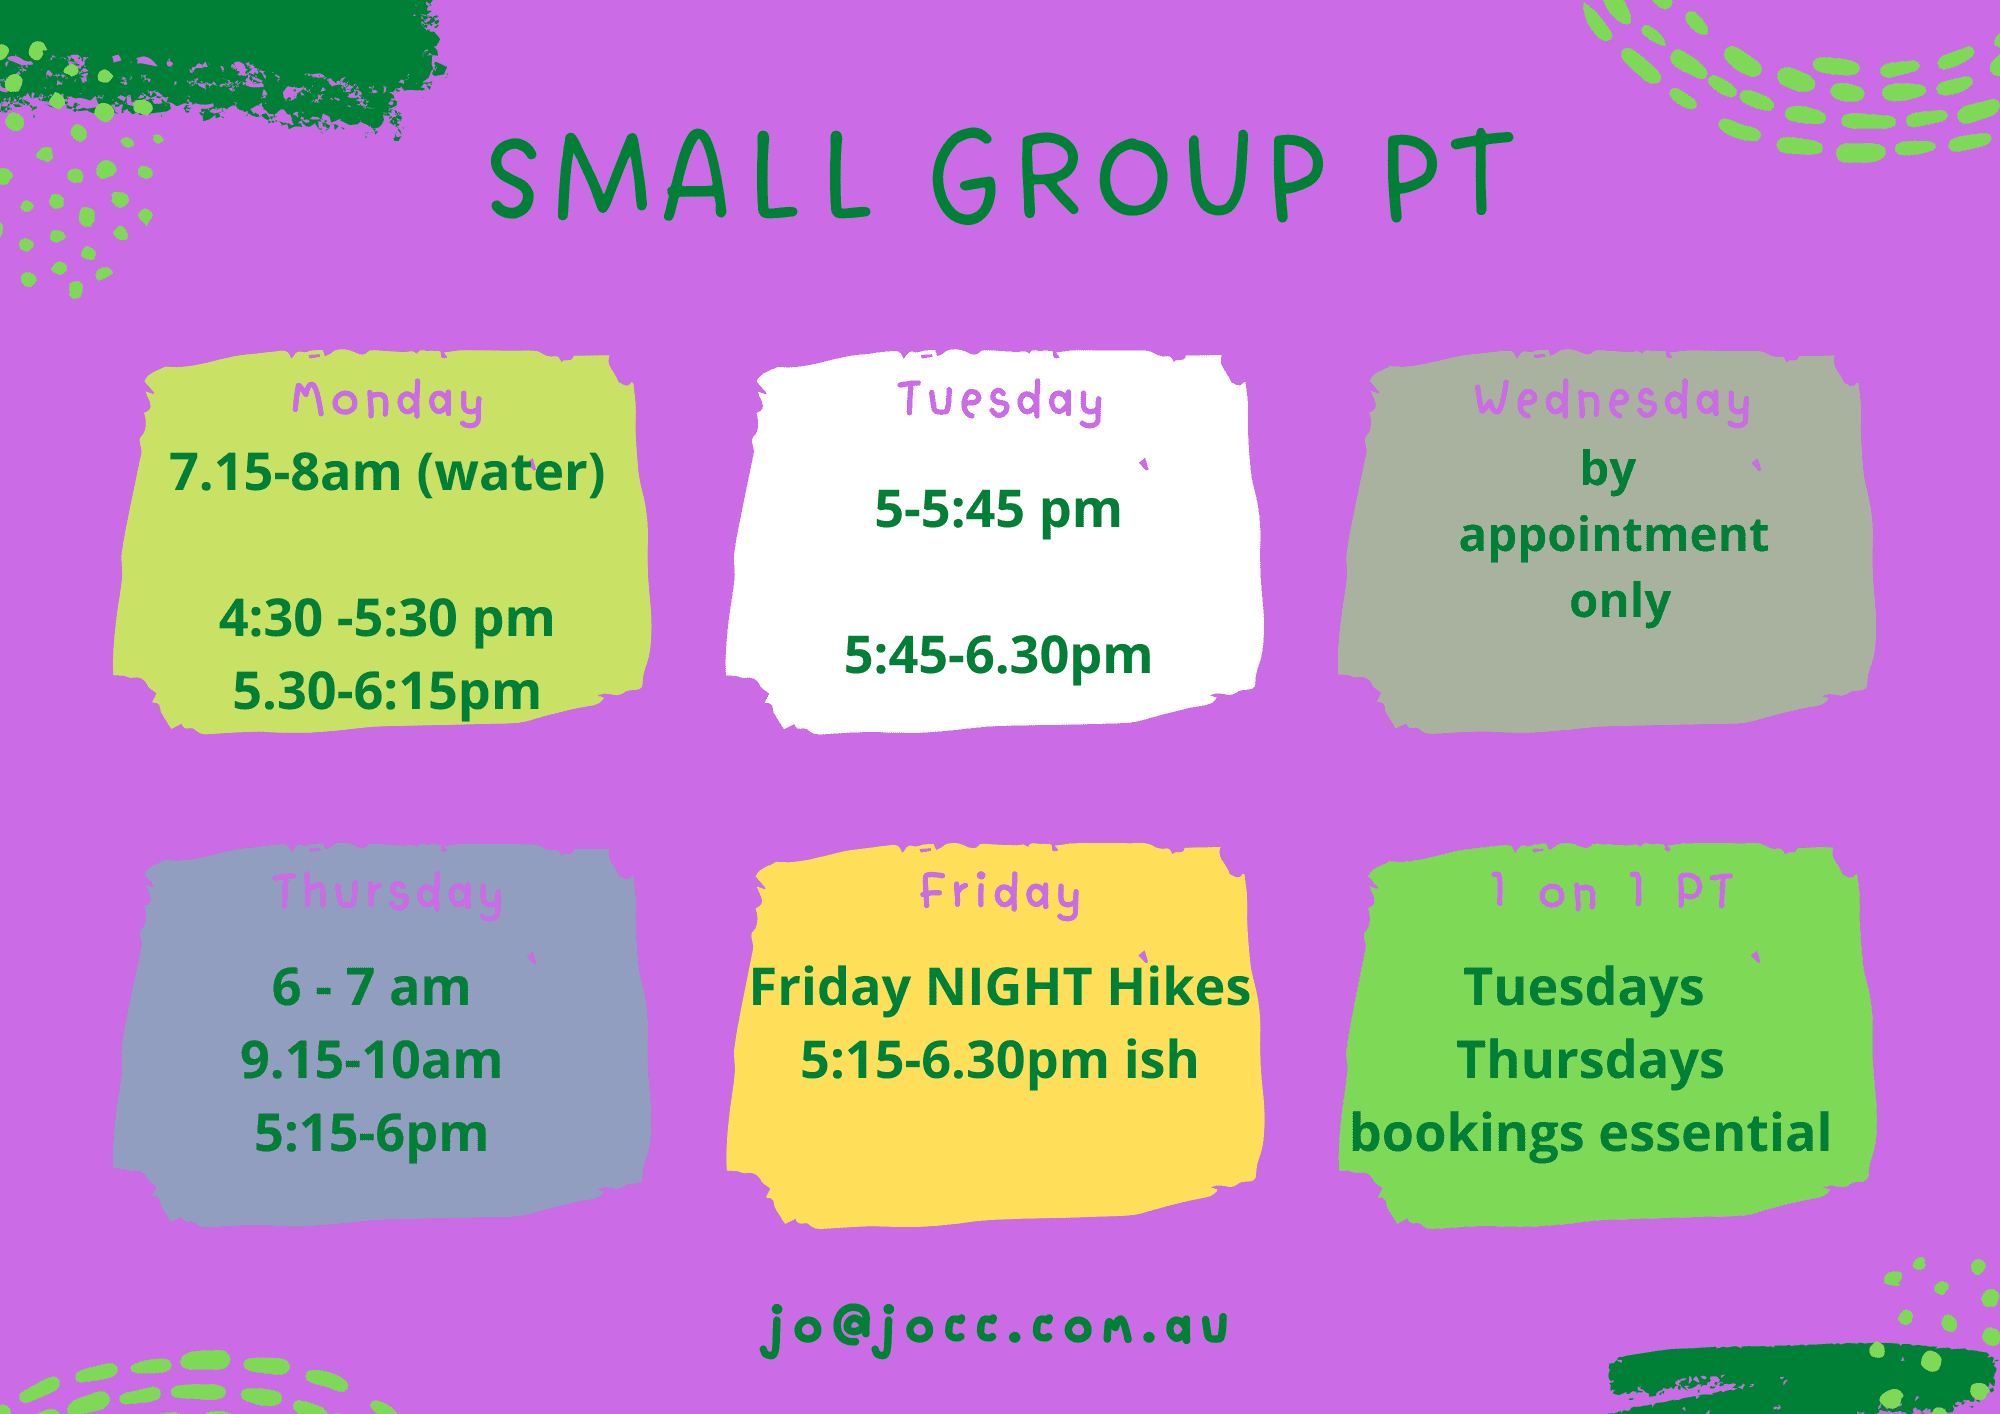 this images shows the timetable of small group personal training sessions